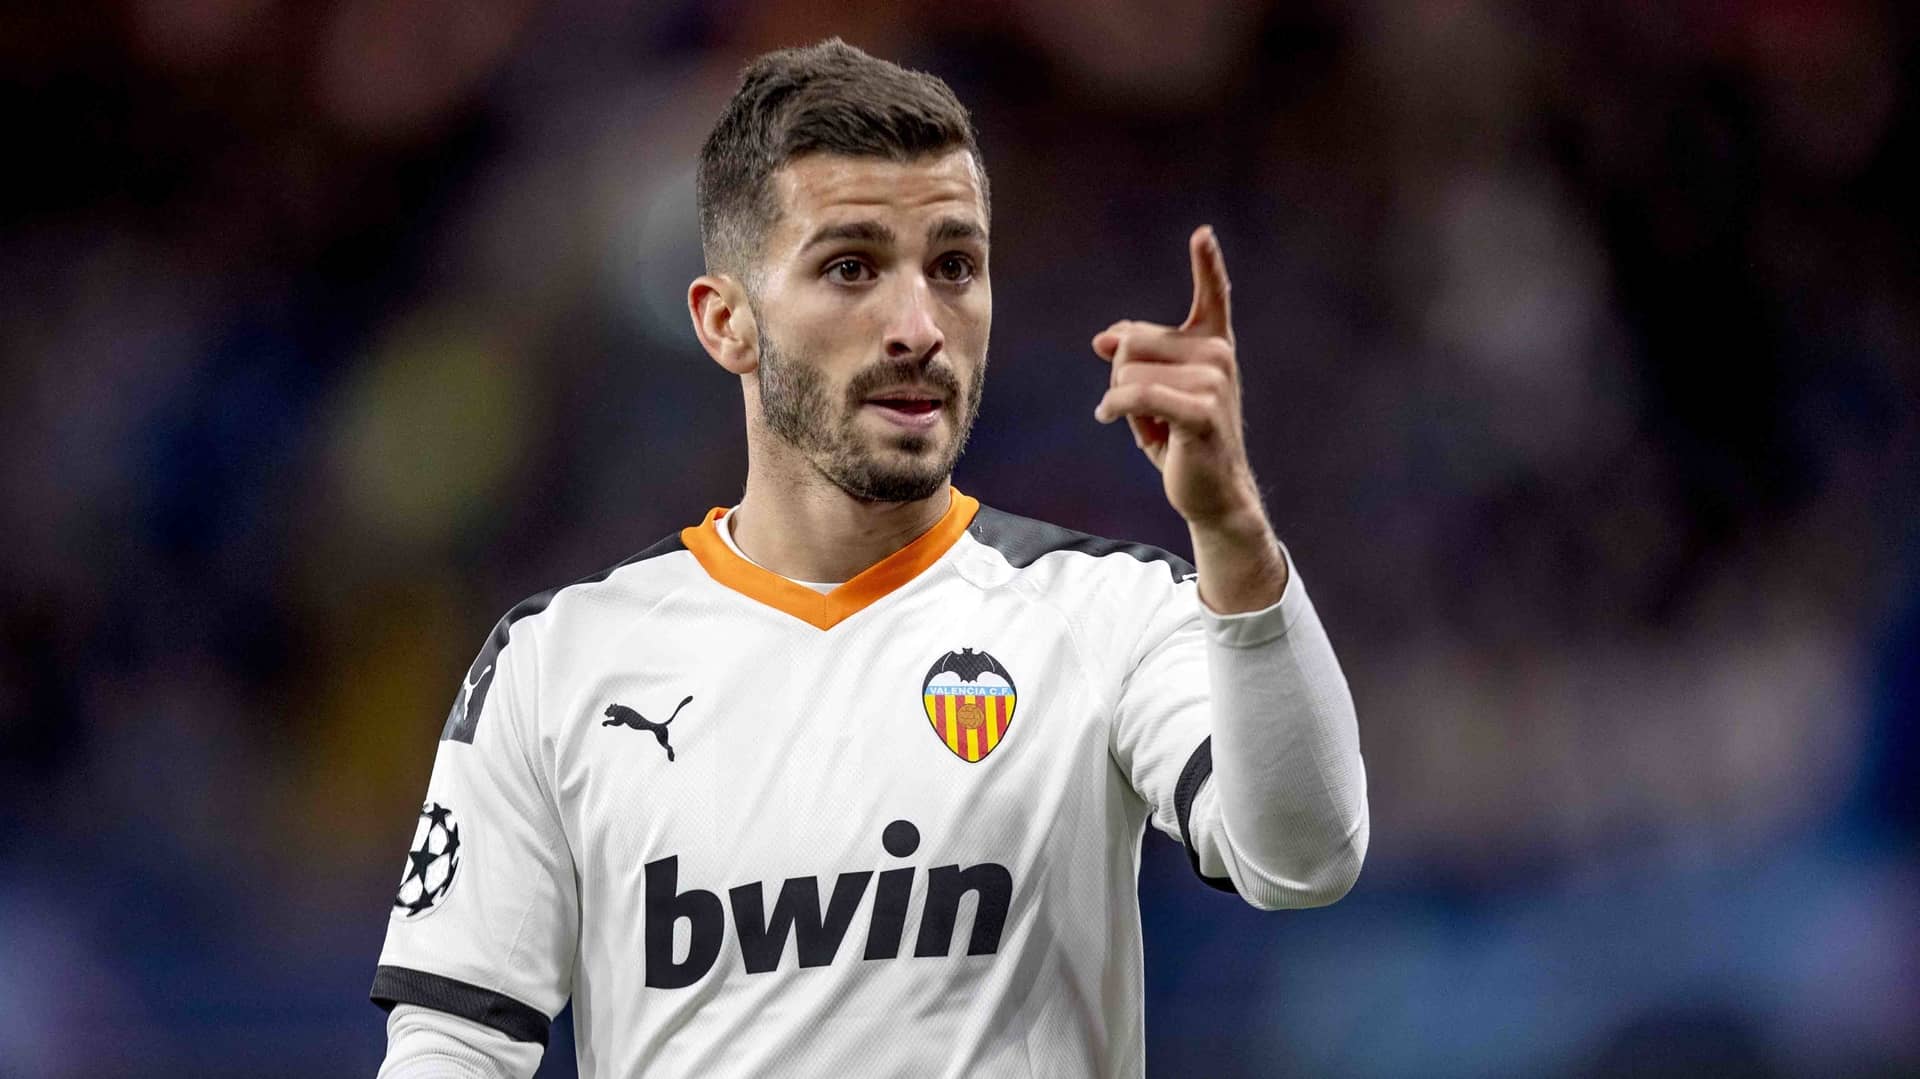 Offer to Valencia CF to forget Gayá
	
